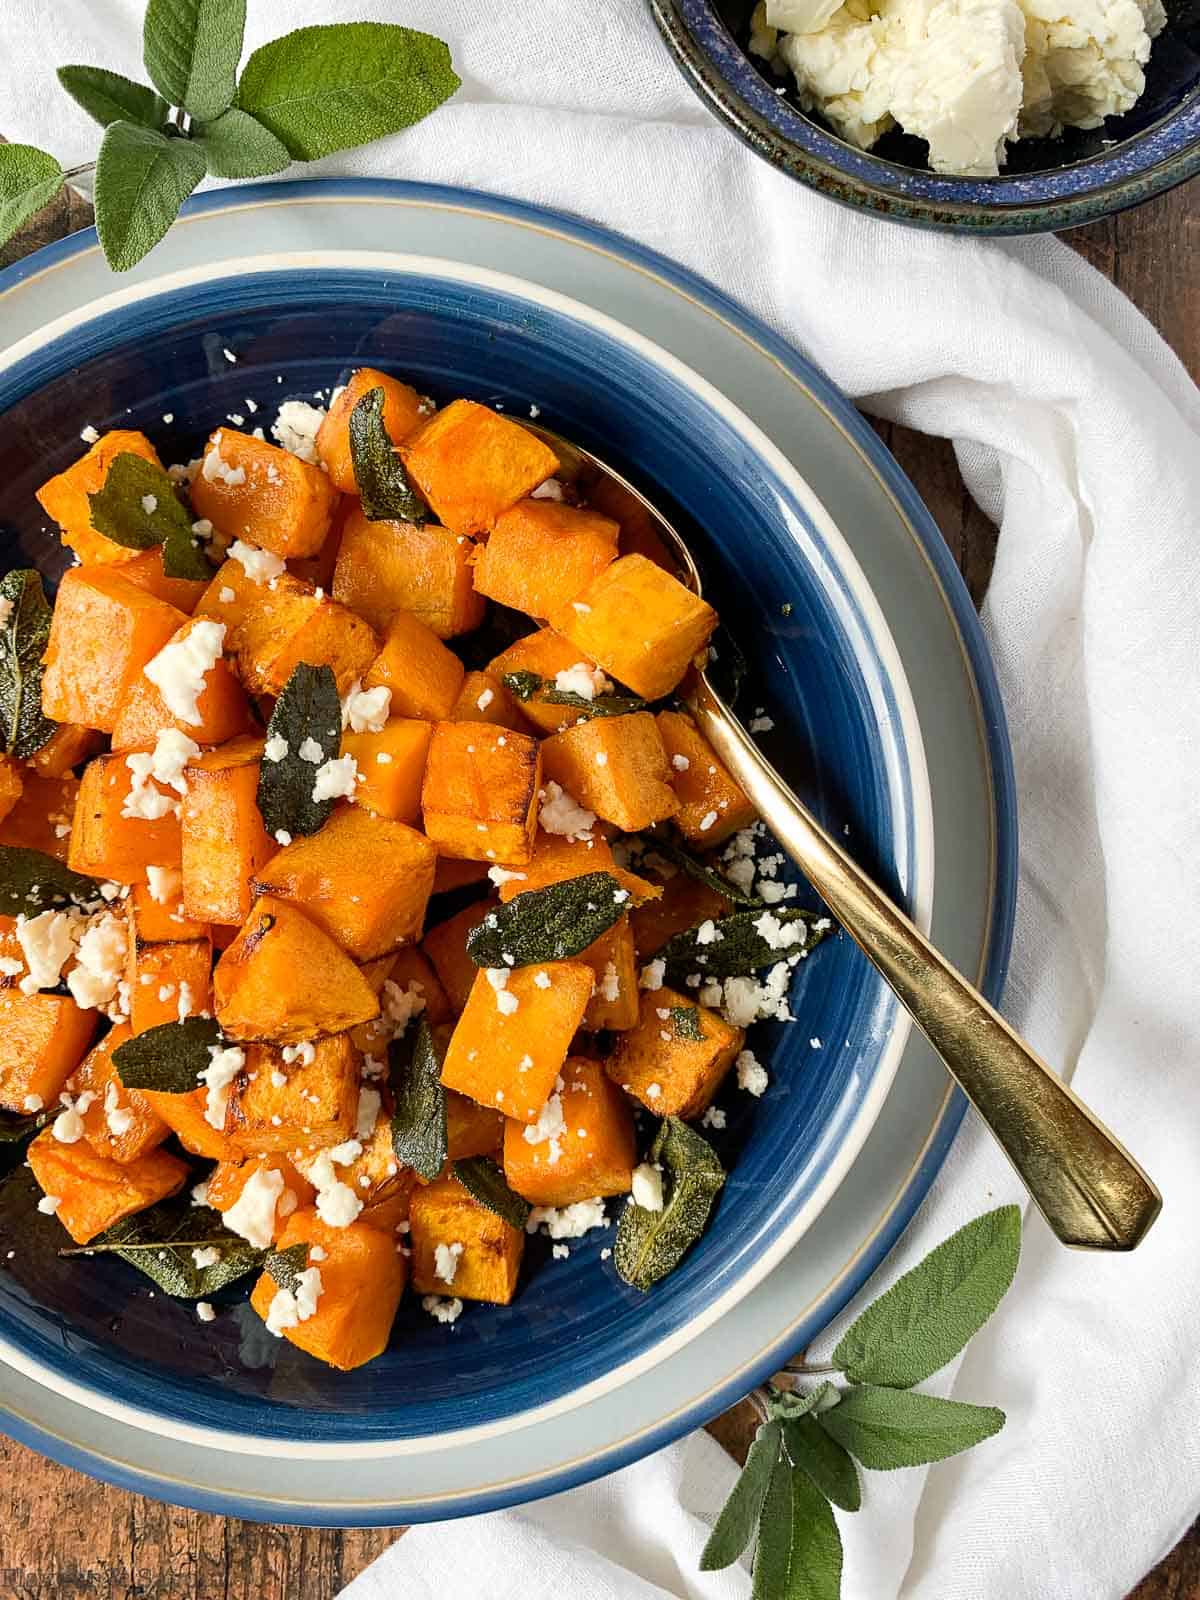 Overhead view of a bowl of butternut squash with feta cheese and toasted sage leaves